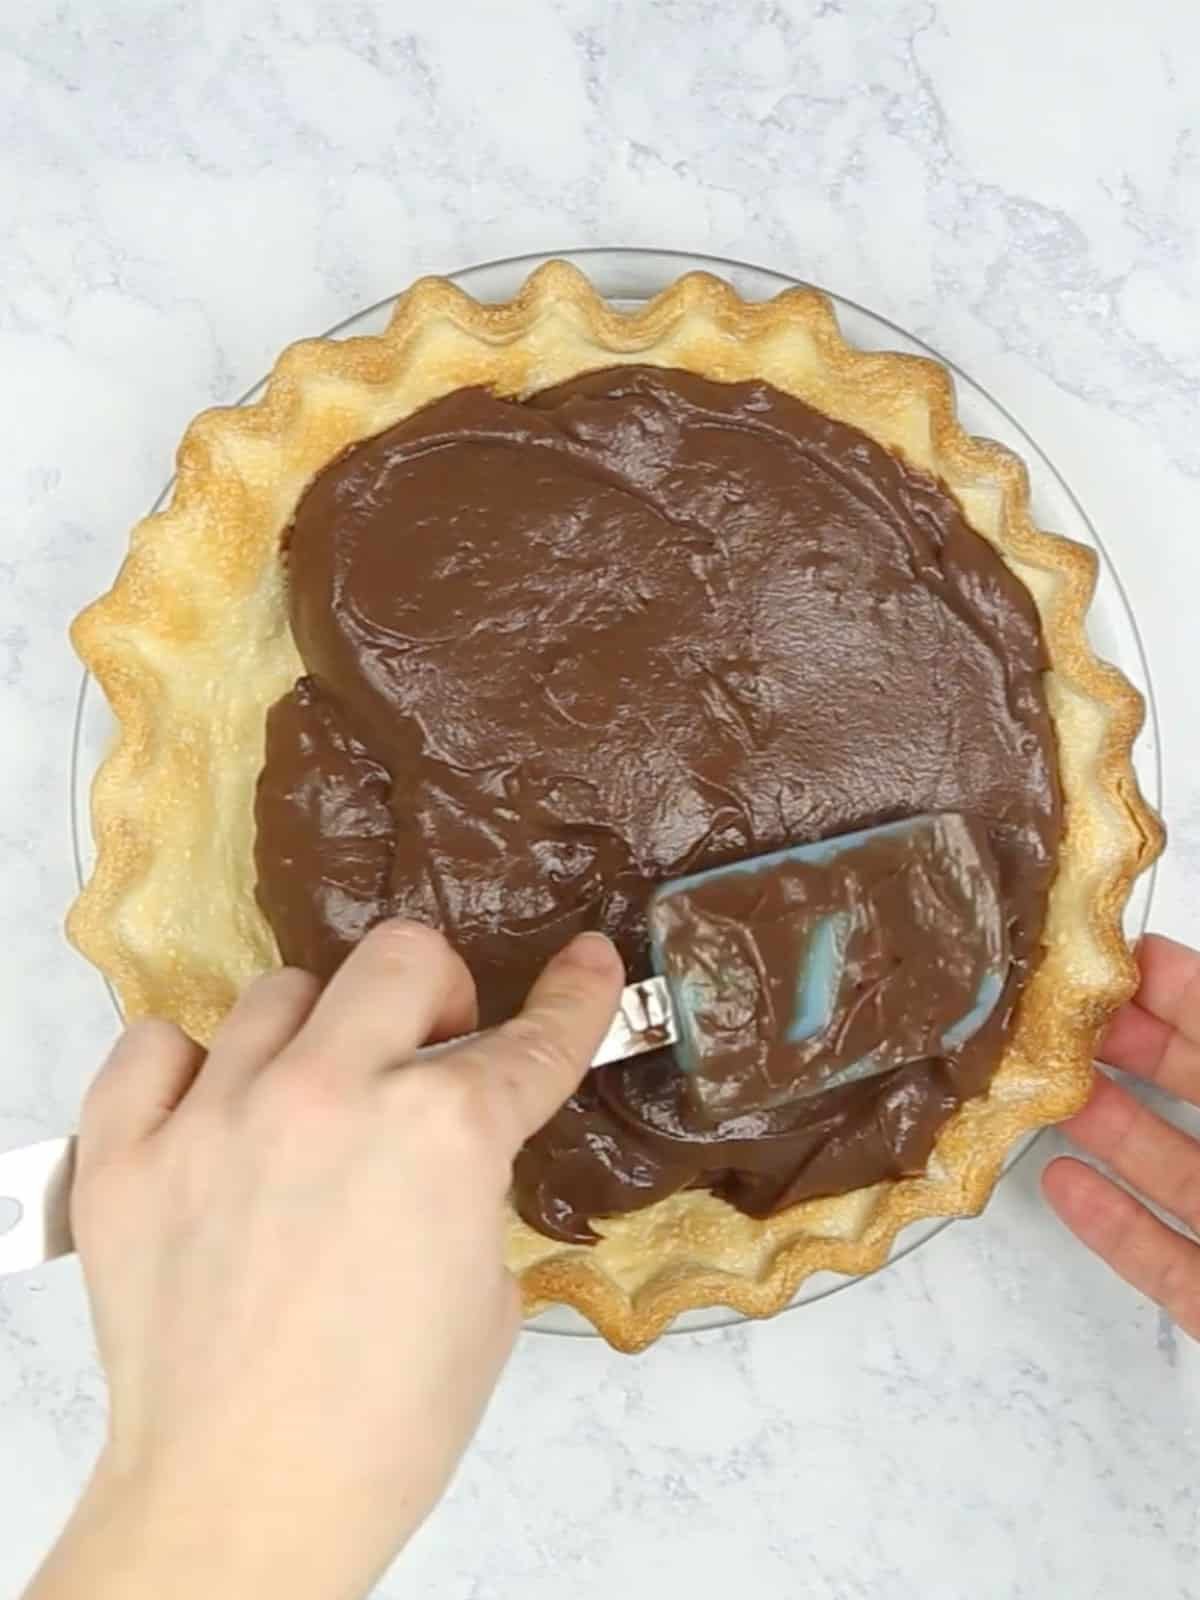 Chocolate pudding being spread in a baked pie crust.